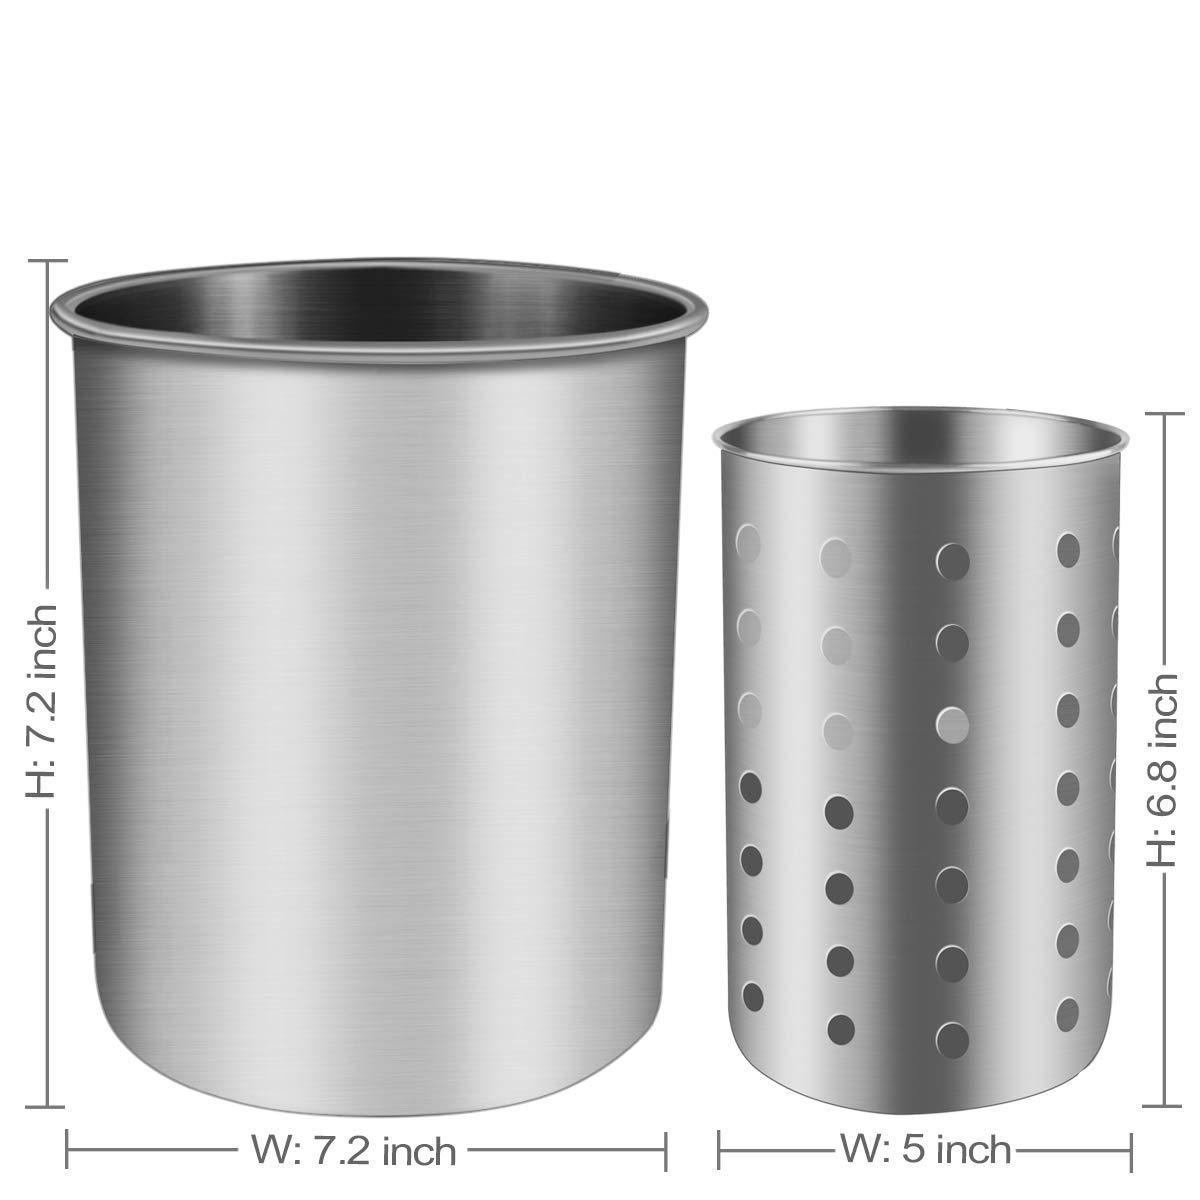 Exclusive utensil holder stainless steel kitchen cooking utensil holder for organizing and storage dishwasher safe silver 2 pack